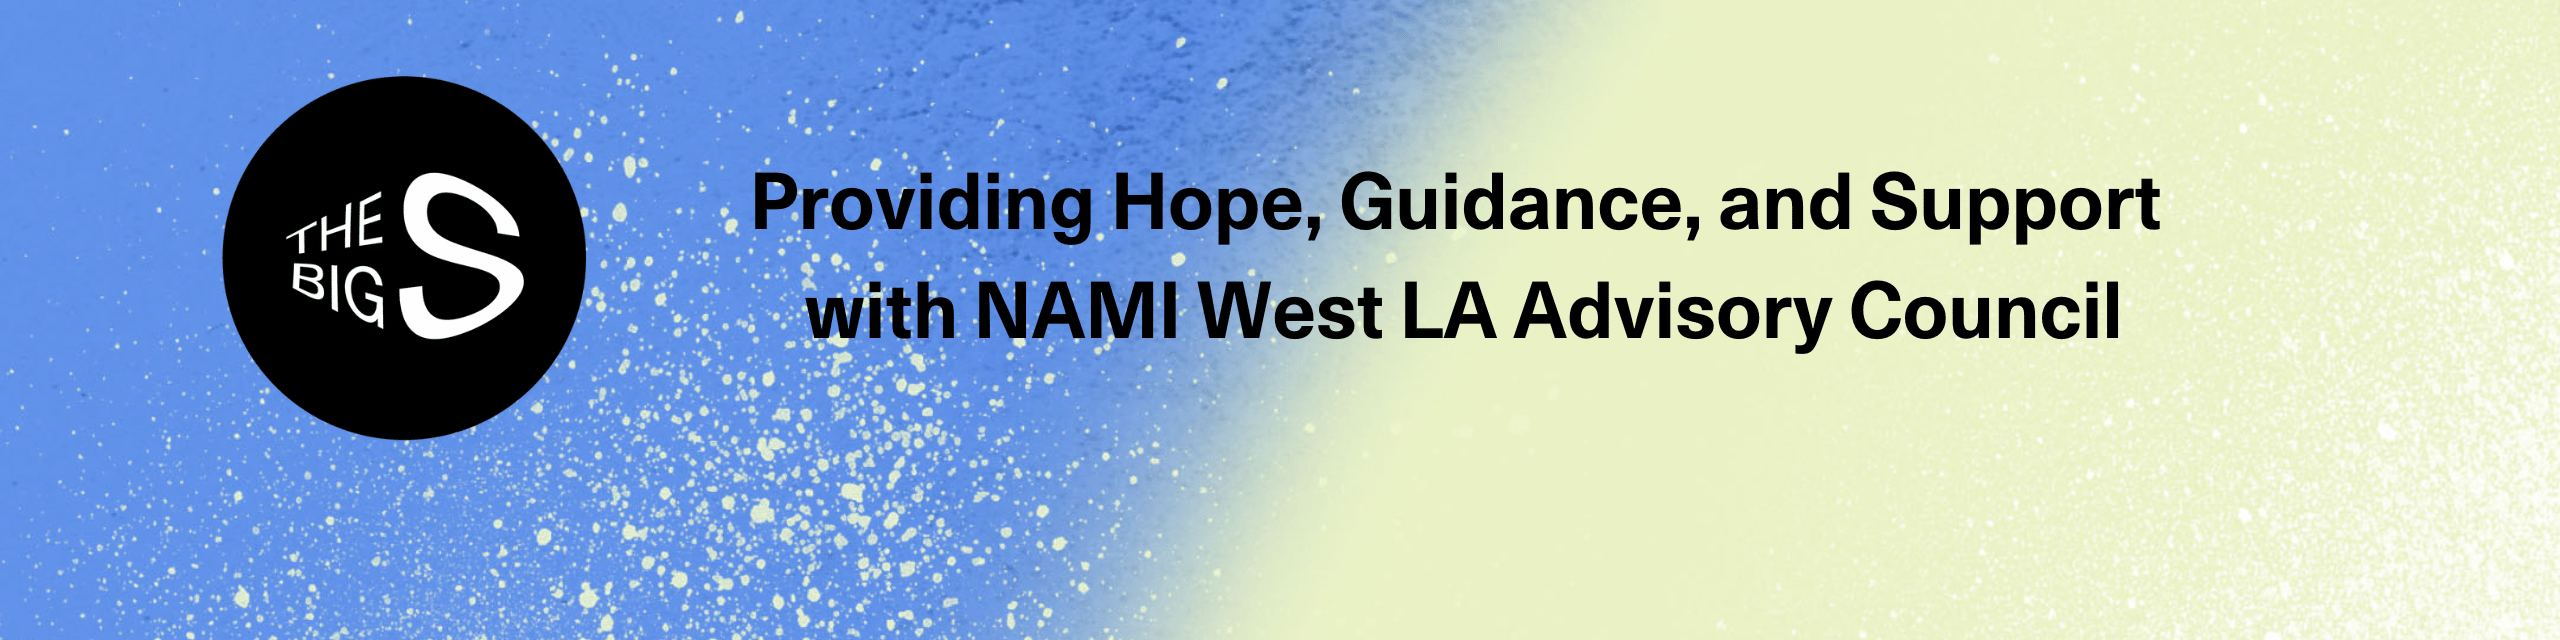 Providing Hope, Guidance, and Support with NAMI West LA Advisory Council